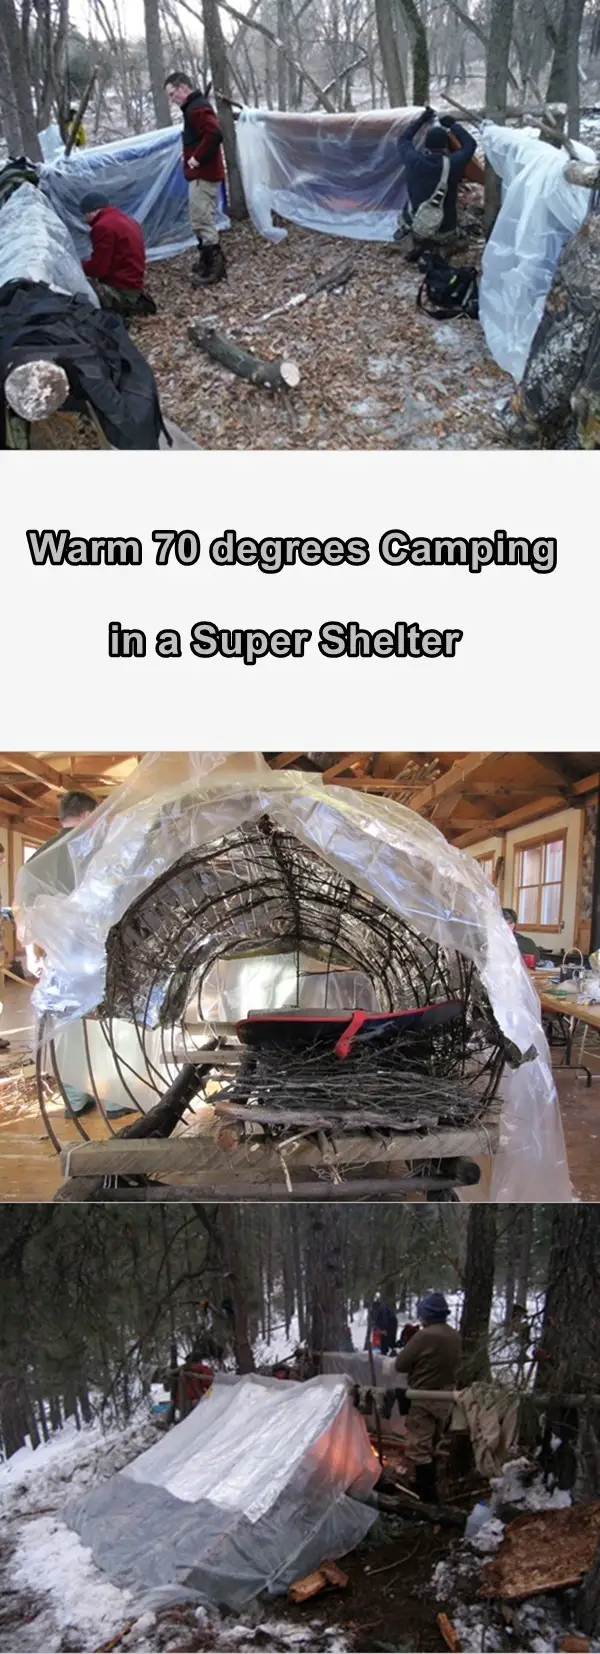 Warm 70 degree Camping in a Super Shelter